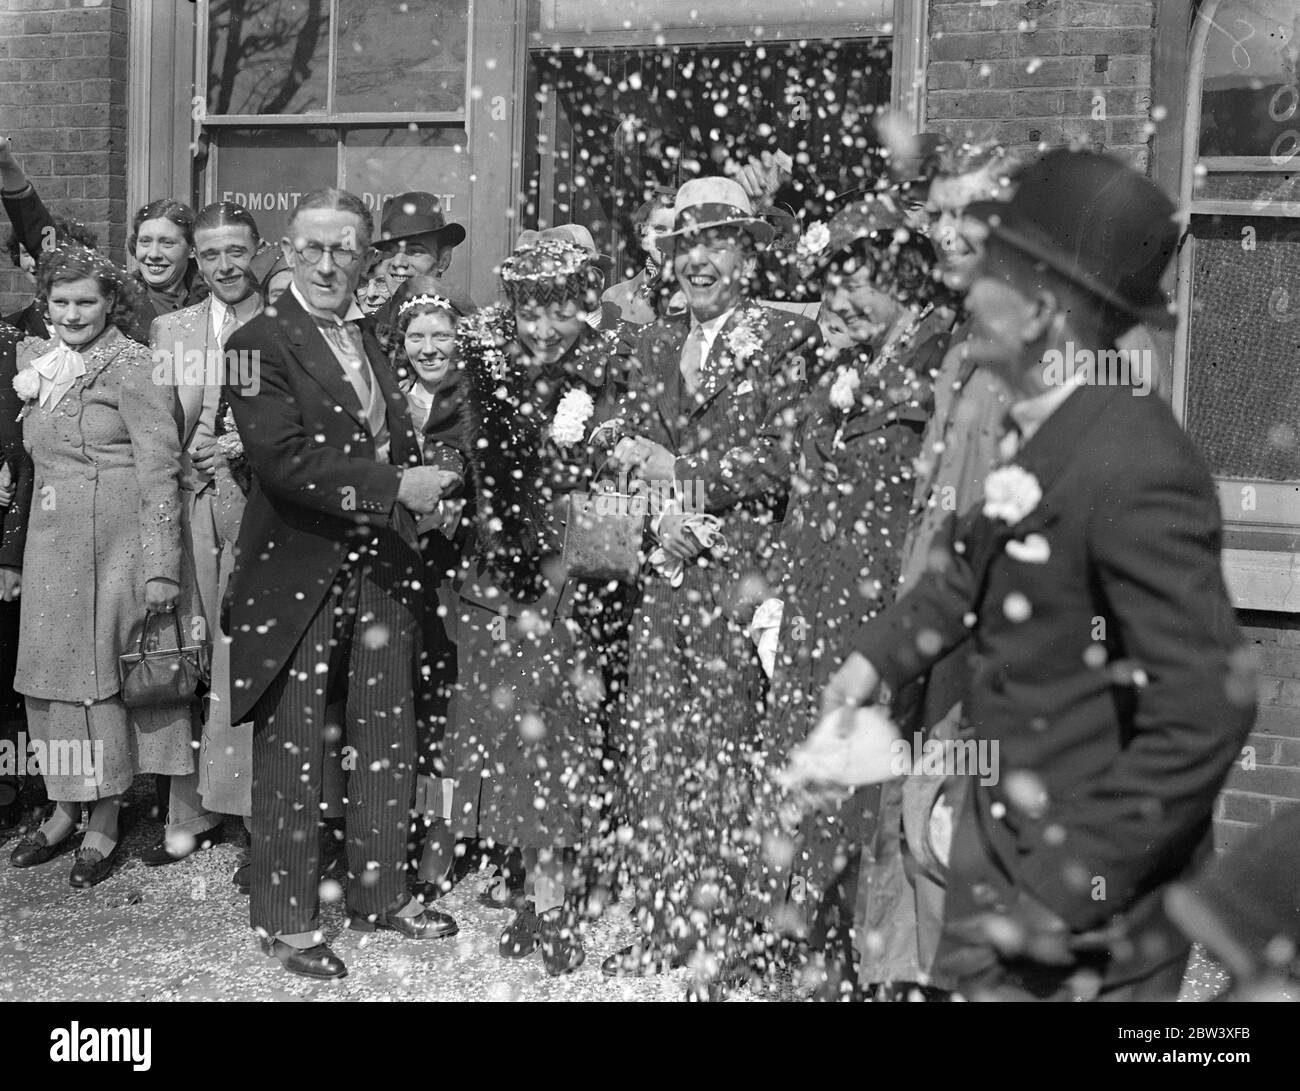 60 weddings were performed at White Hart Lane Register Office, Tottenham, today. This is the peak day for Easter holiday rush where 30 ceremonies will be performed. Photo shows-Mr Walter Grimaldi, the registrar, congratulating couples under a shower of confetti. In 25 years Mr Grimaldi has performed 20,000 weddings, believed to be a record for the country. 27th March 1937 Stock Photo